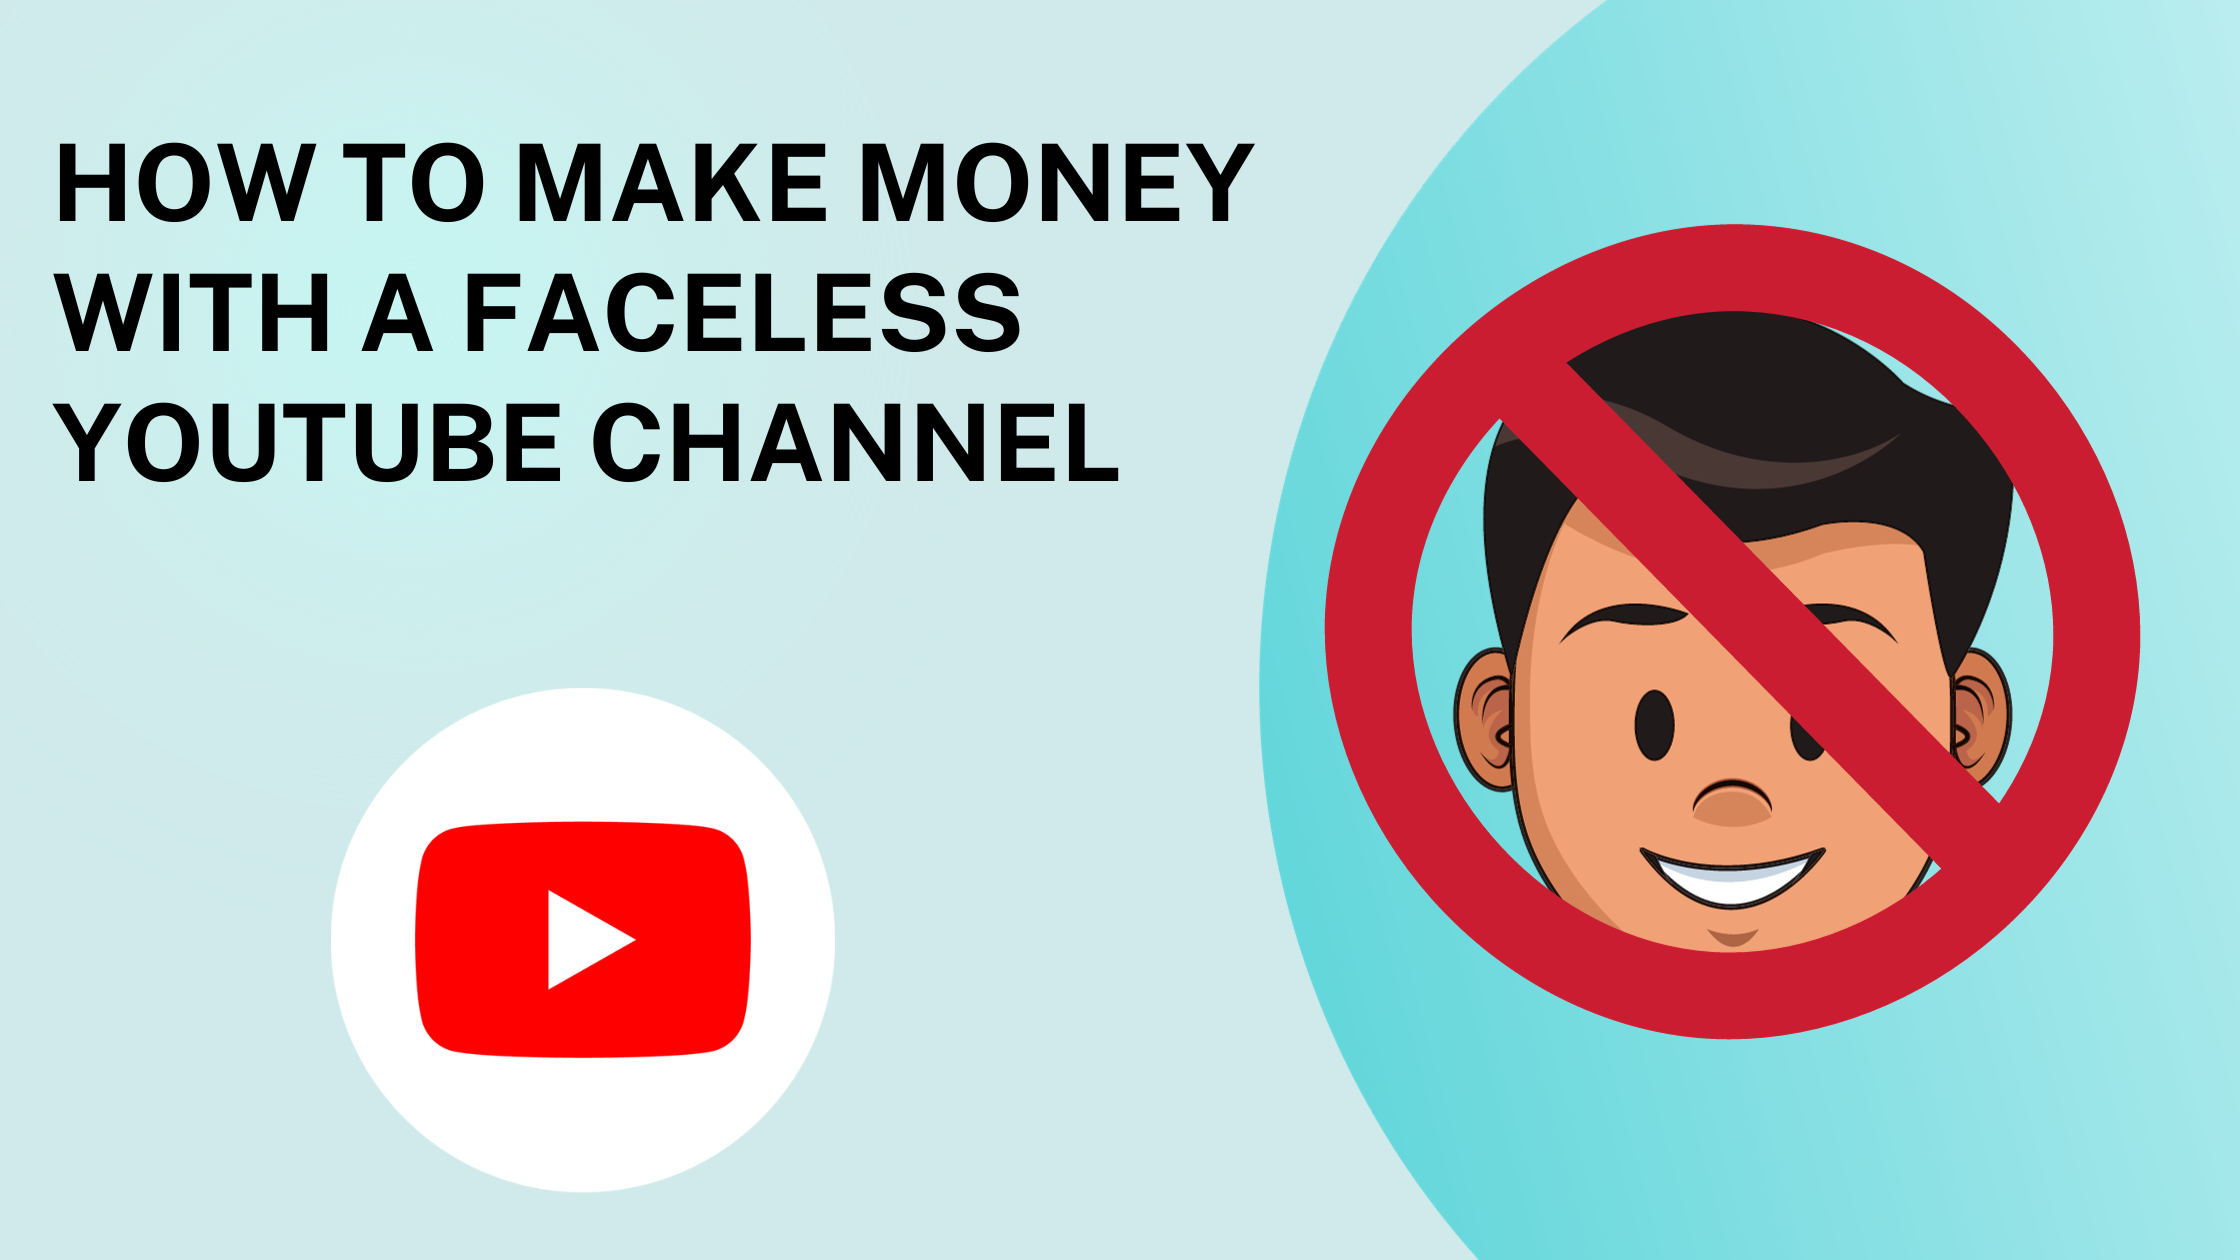 How to make money on Youtube without showing your face